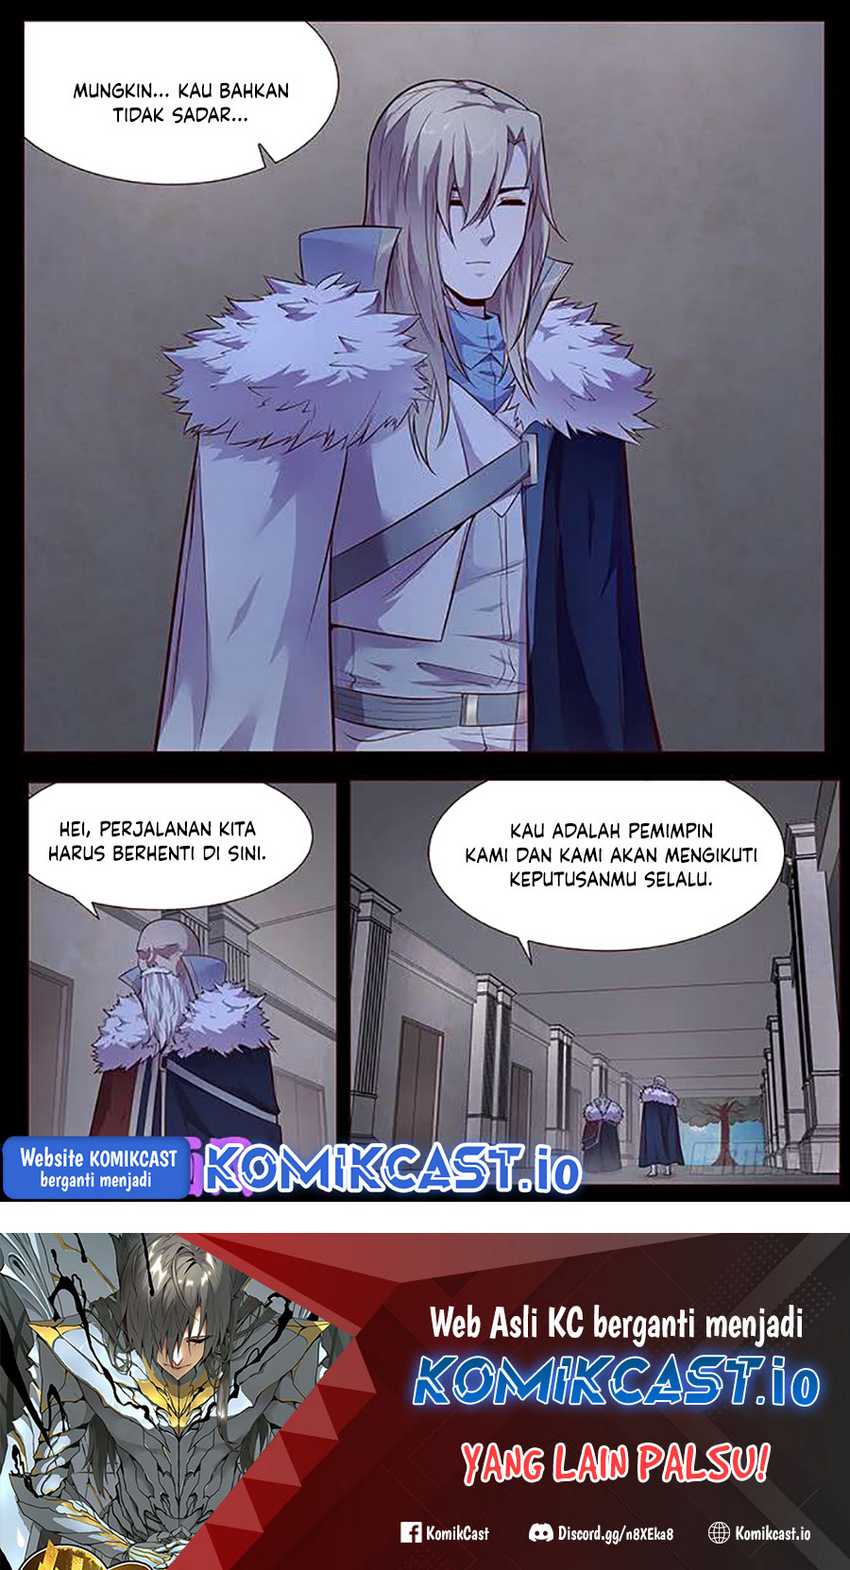 Girl and Science Chapter 341